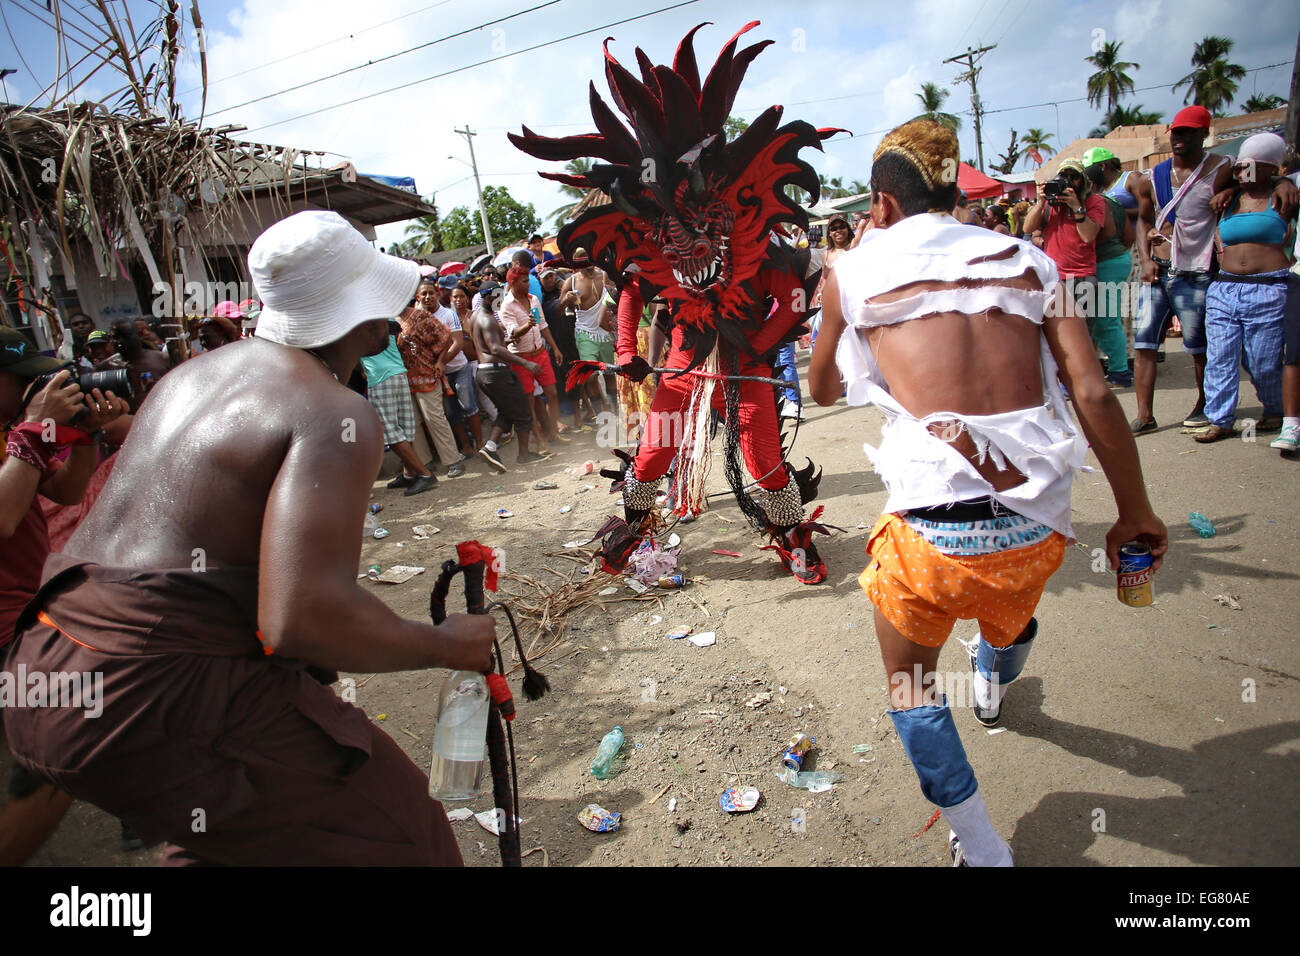 Colon, Panama. 18th Feb, 2015. A dancer in devil costume takes part in the Ash Wednesday celebration at Nombre de Dios village, Colon province, Panama, on Feb. 18, 2015. The dance of the 'Devil and Congo' represents the way in which African slaves and runaway salves mocking their masters during the colonial period, performing the good with the 'congos' and the evil with the devil figure, according to local press. © Mauricio Valenzuela/Xinhua/Alamy Live News Stock Photo